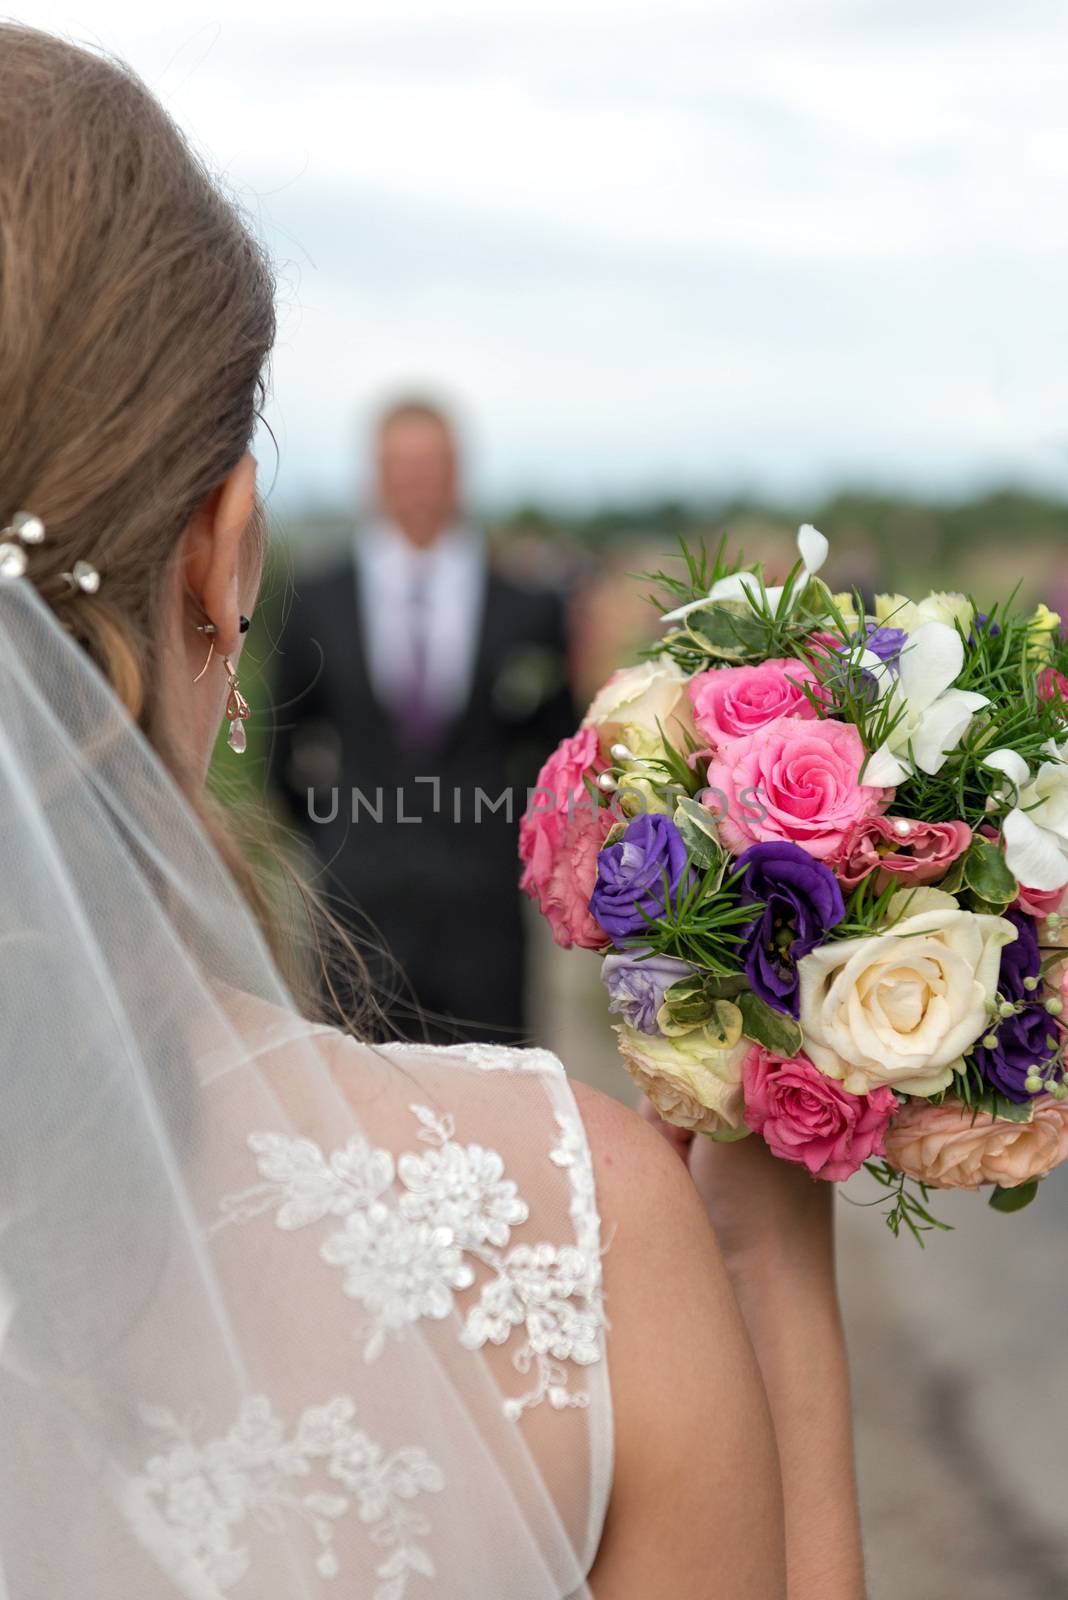 Bride with bridal bouquet in the hands of the groom expect. by askoldsb